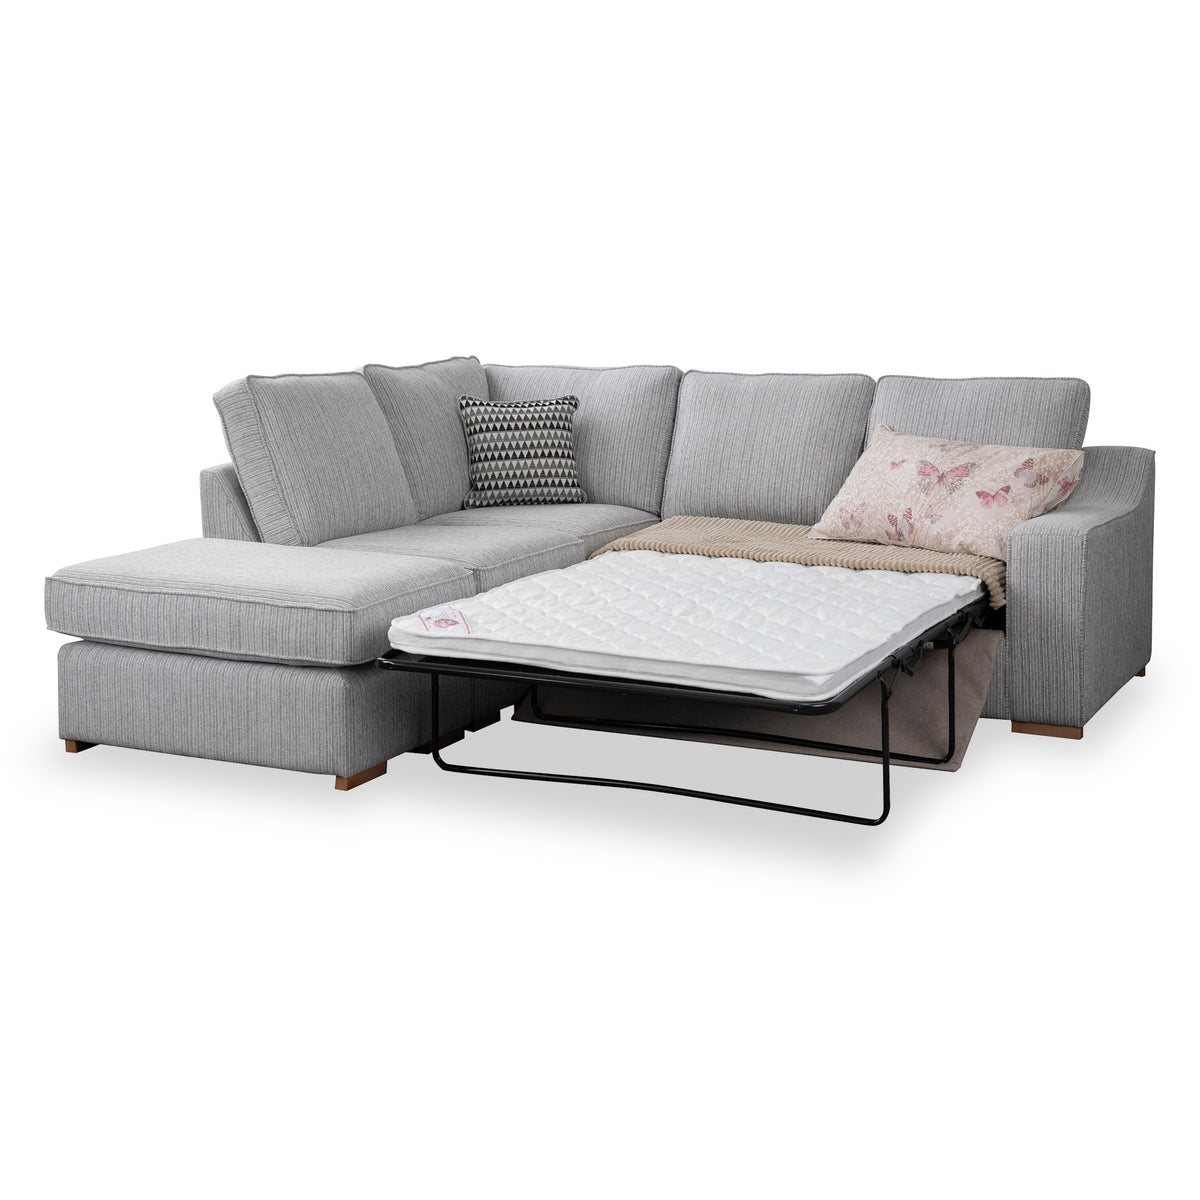 Ashow Silver Left Hand Corner Sofabed with Maika Dusk Scatter Cushions from Roseland furniture